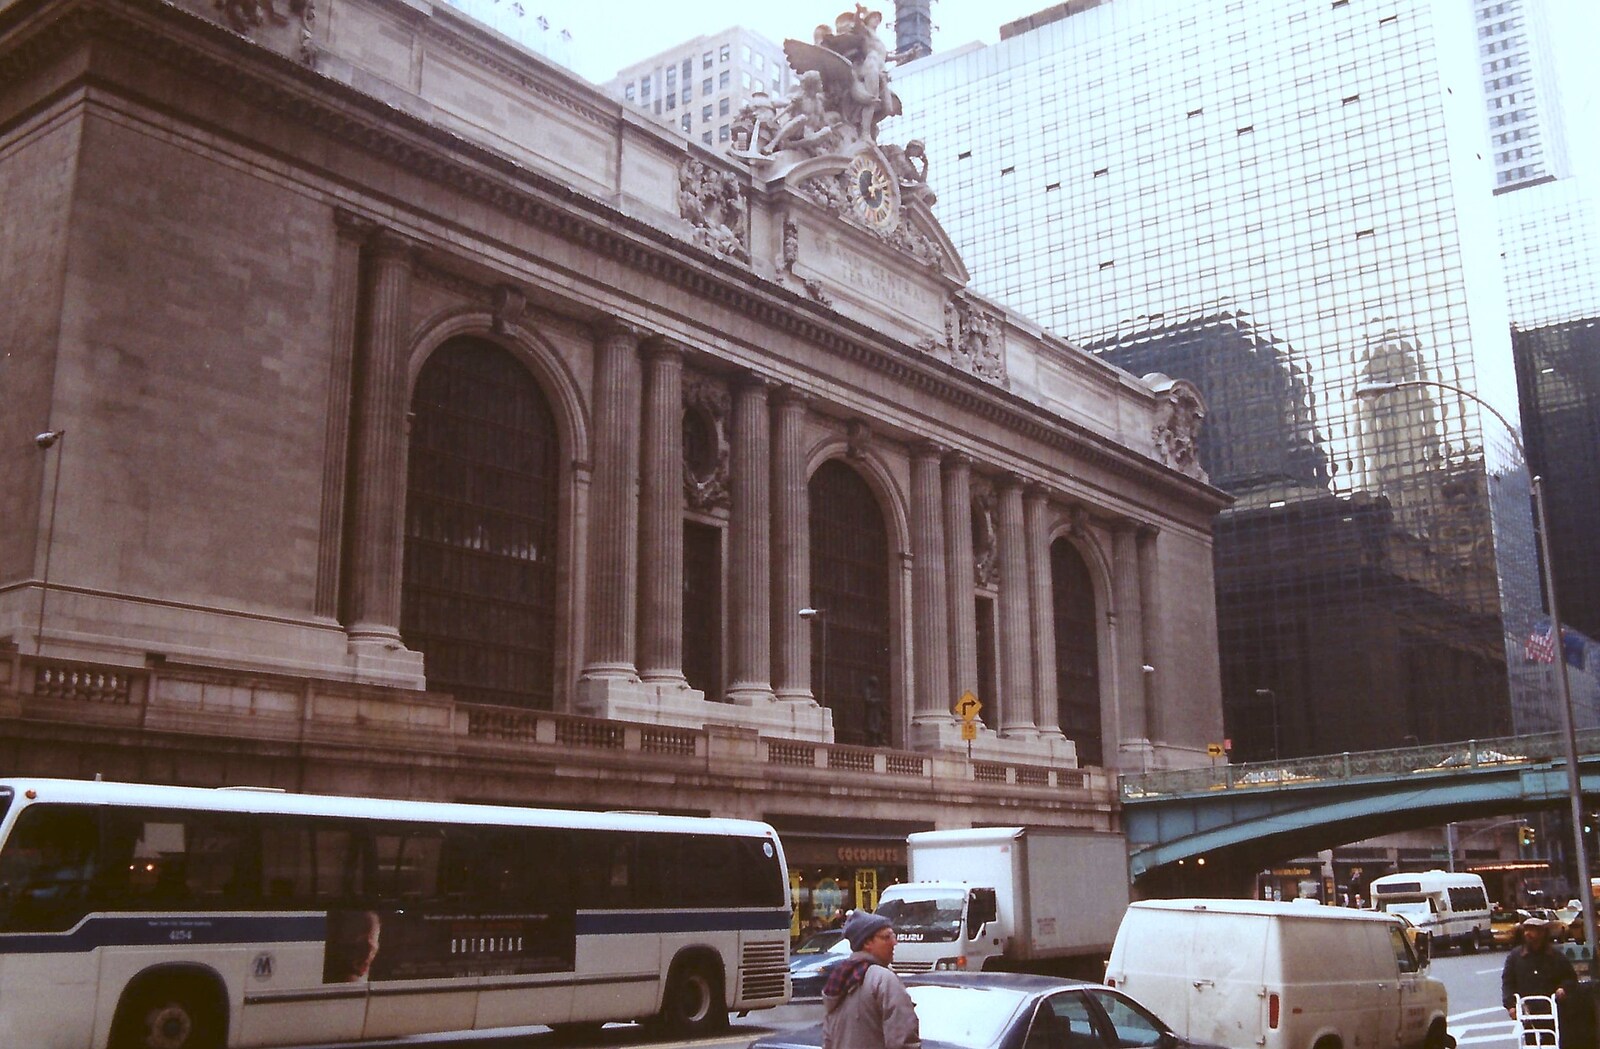 The front of Grand Central station from A Trip to New York, New York, USA - 11th March 1995